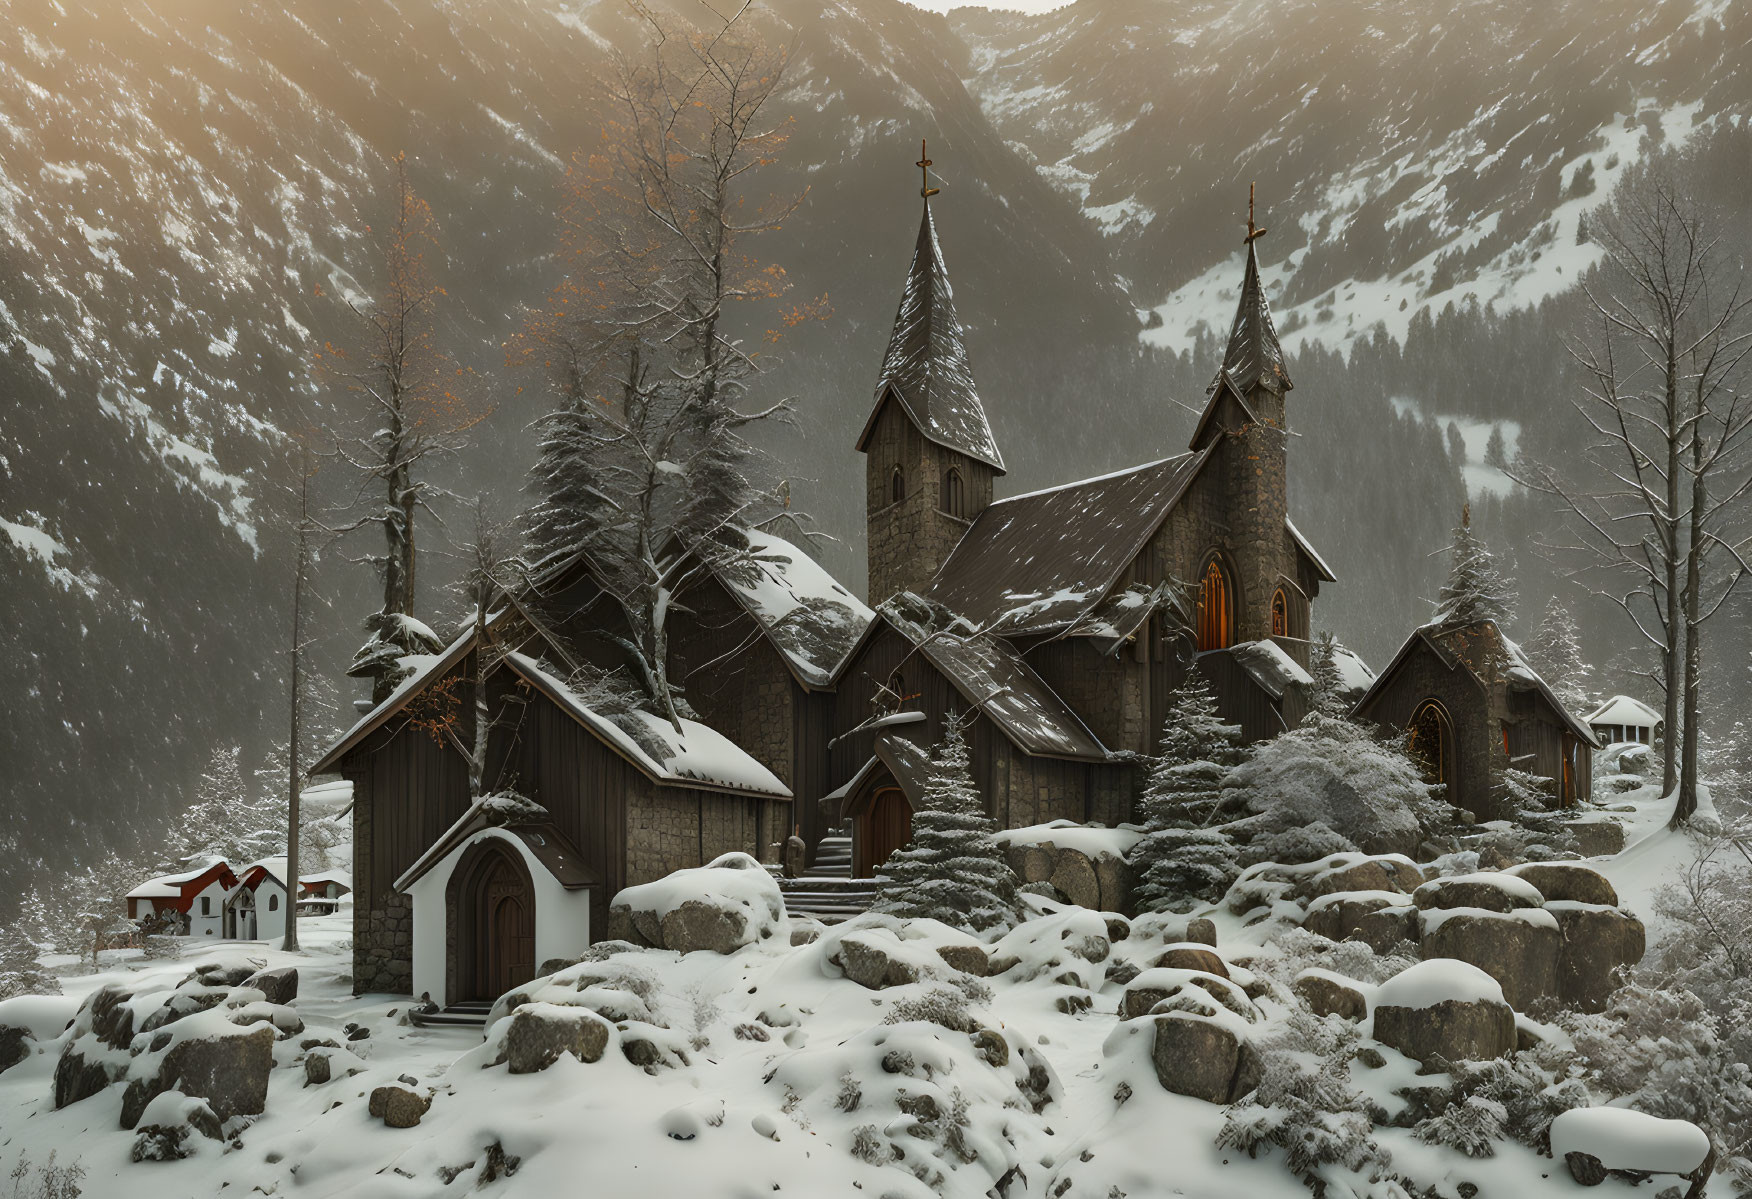 Snowy Mountain Landscape: Quaint Wooden Church with Twin Spires